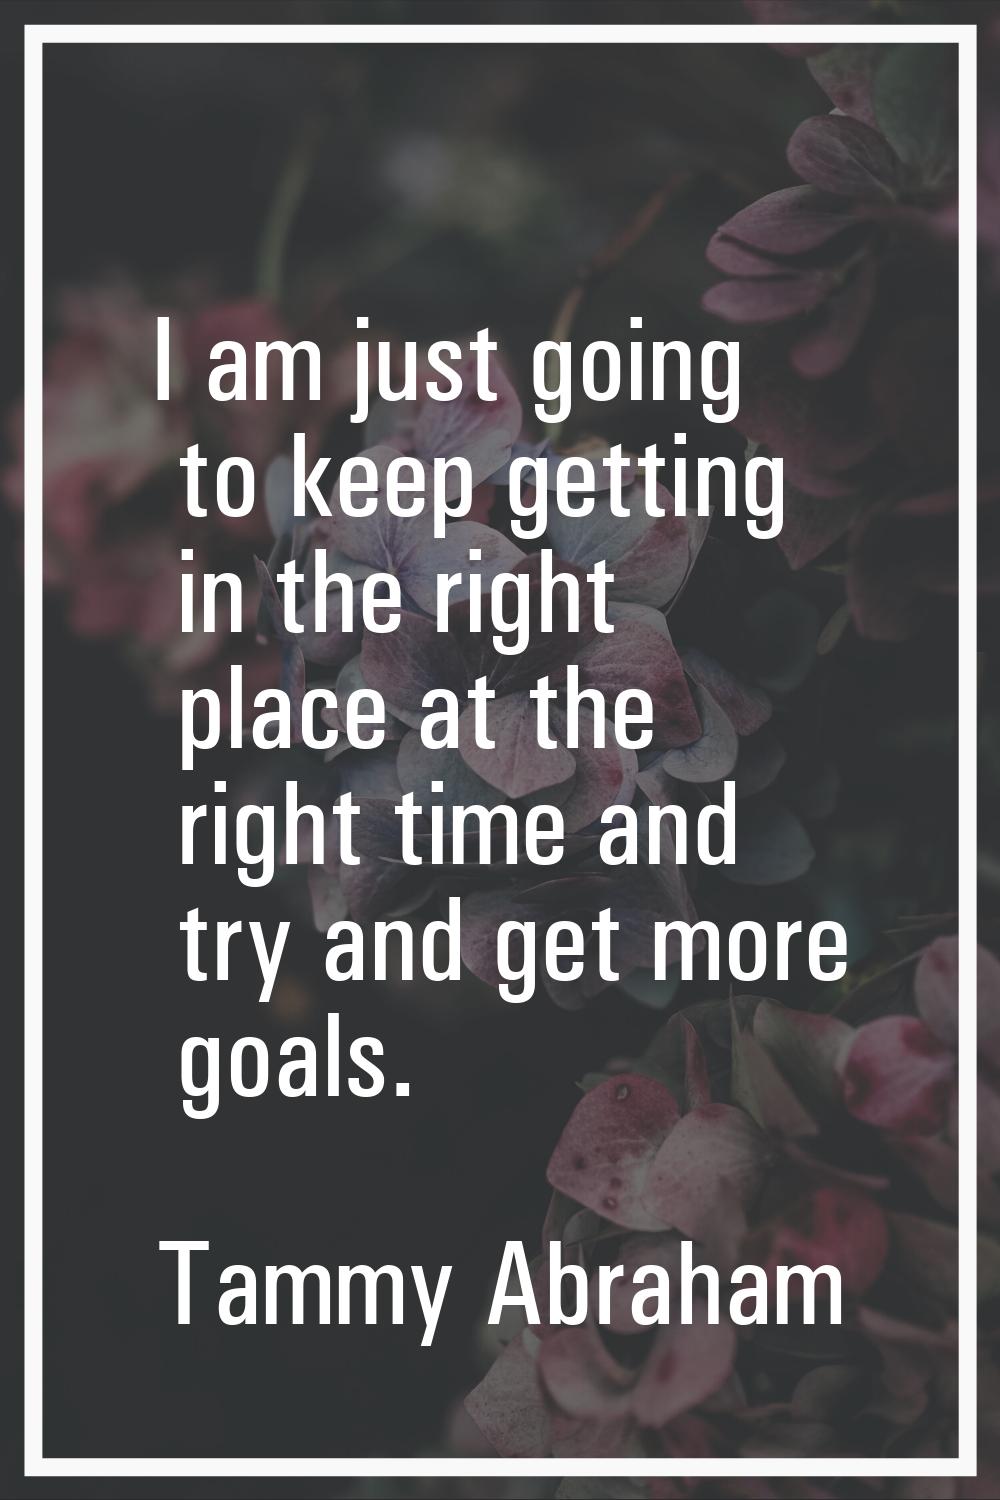 I am just going to keep getting in the right place at the right time and try and get more goals.